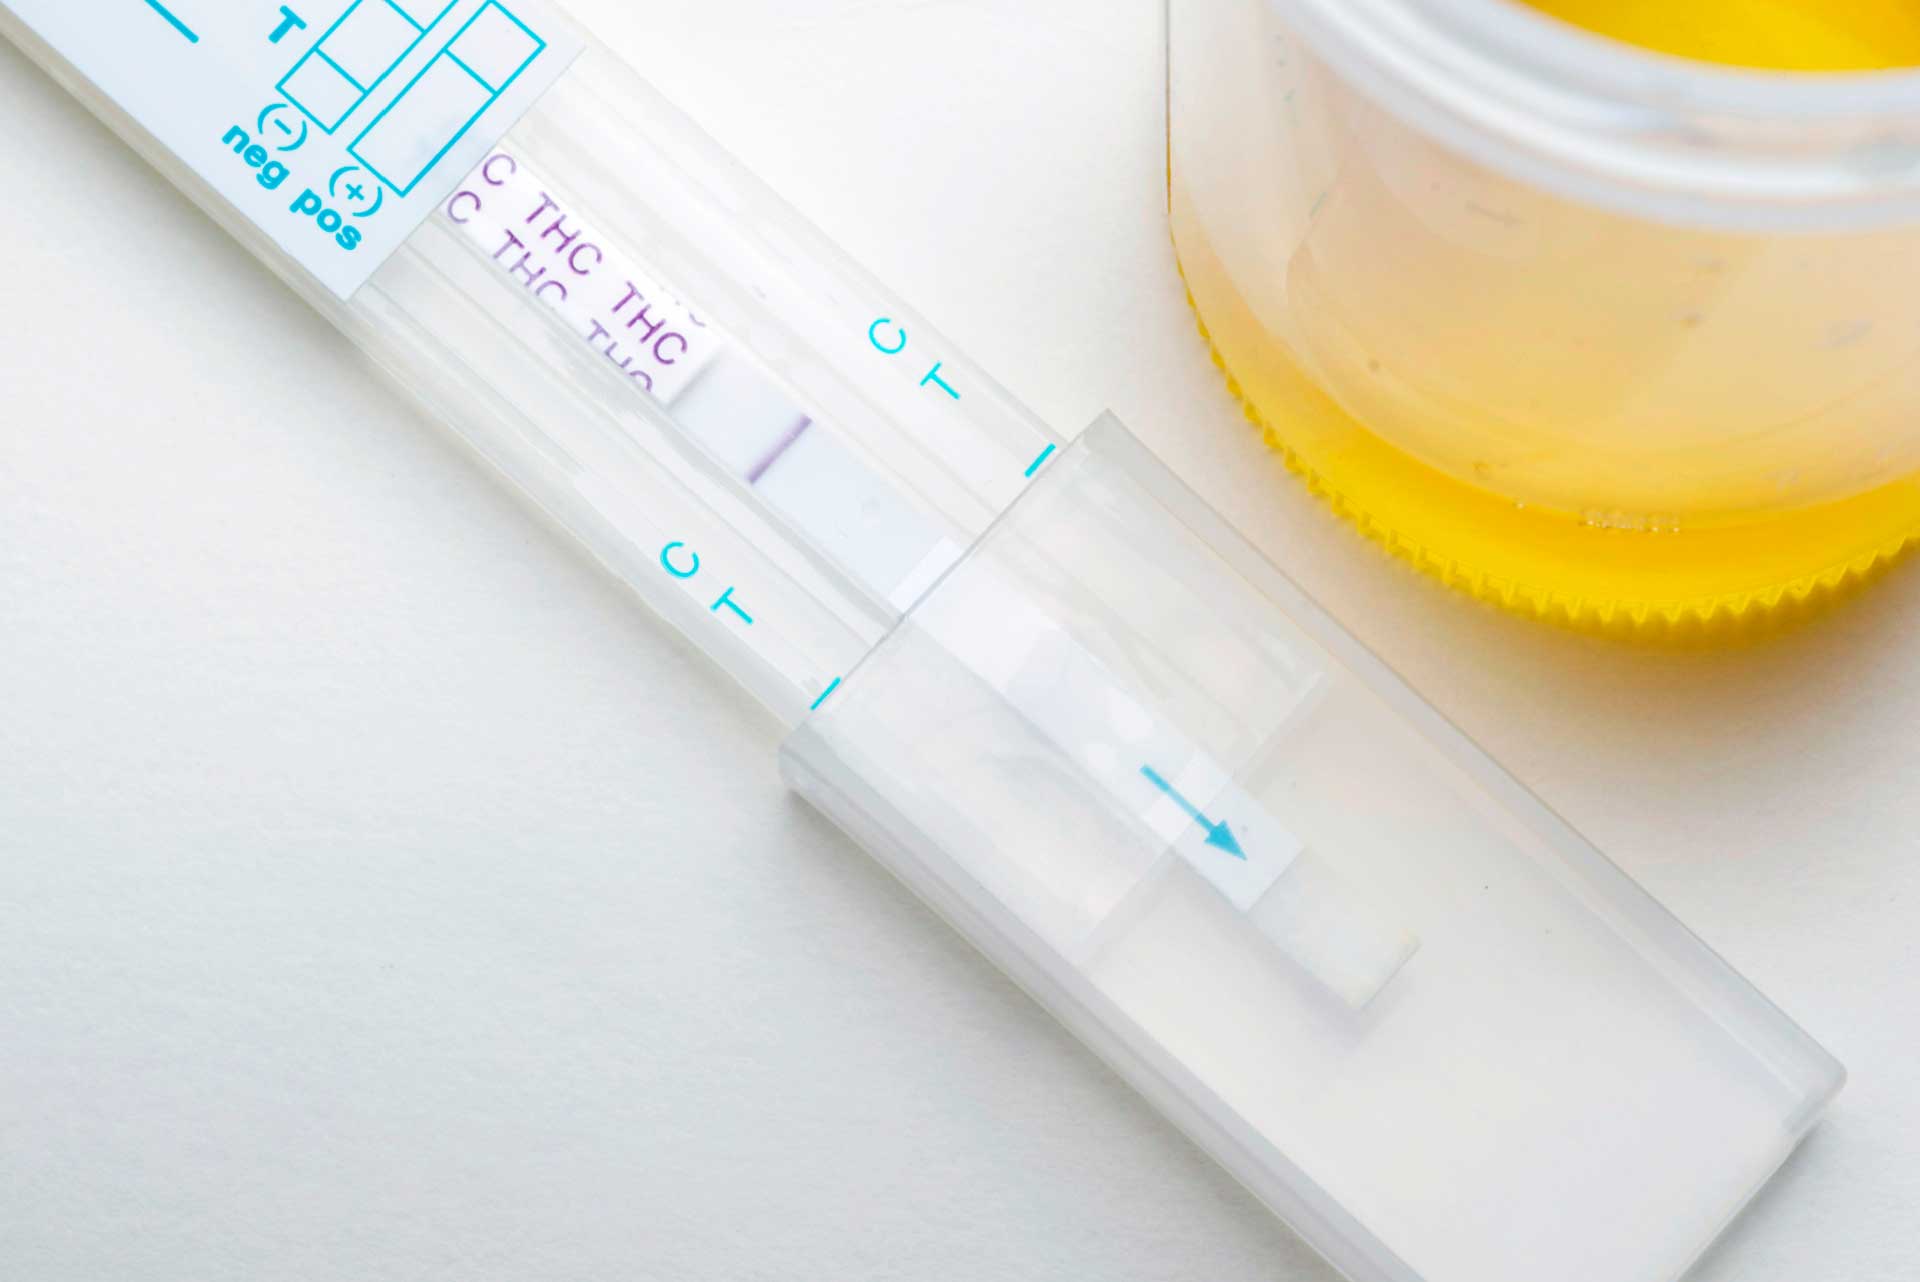 THC drug test strip beside a urine sample in a cup.